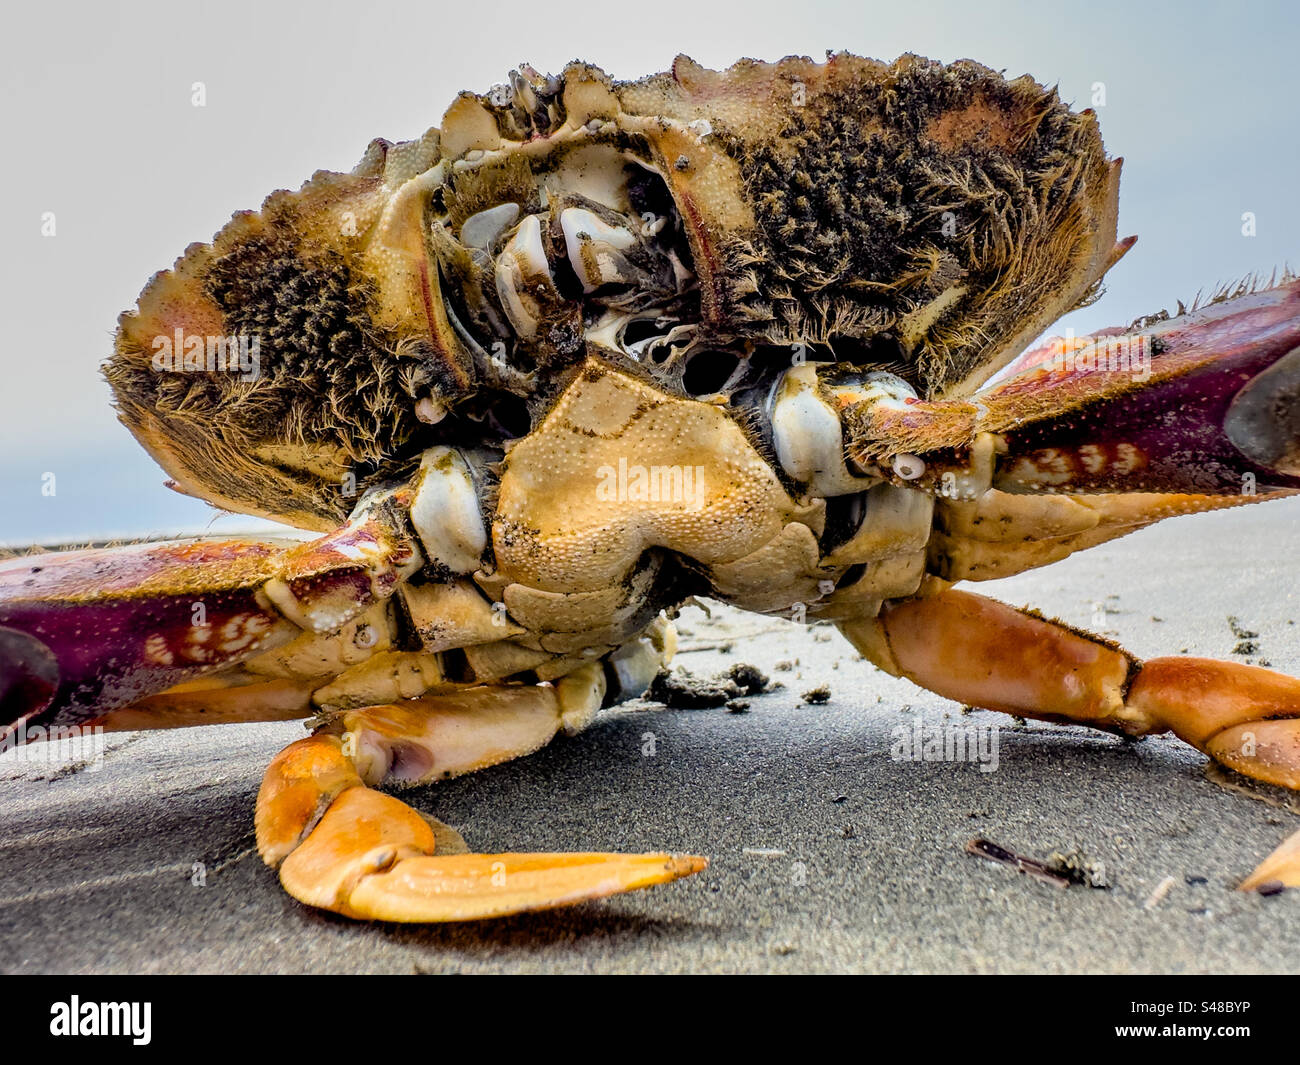 Dungeness crab on a beach in Washington state Stock Photo